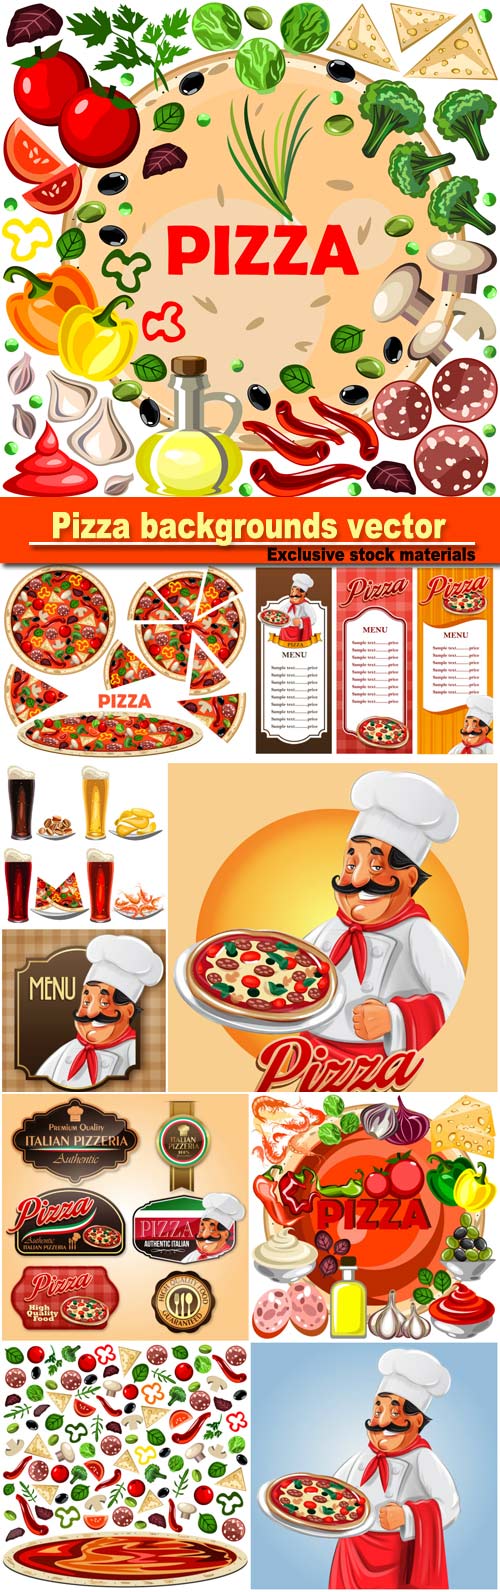 Pizza, labels and backgrounds vector